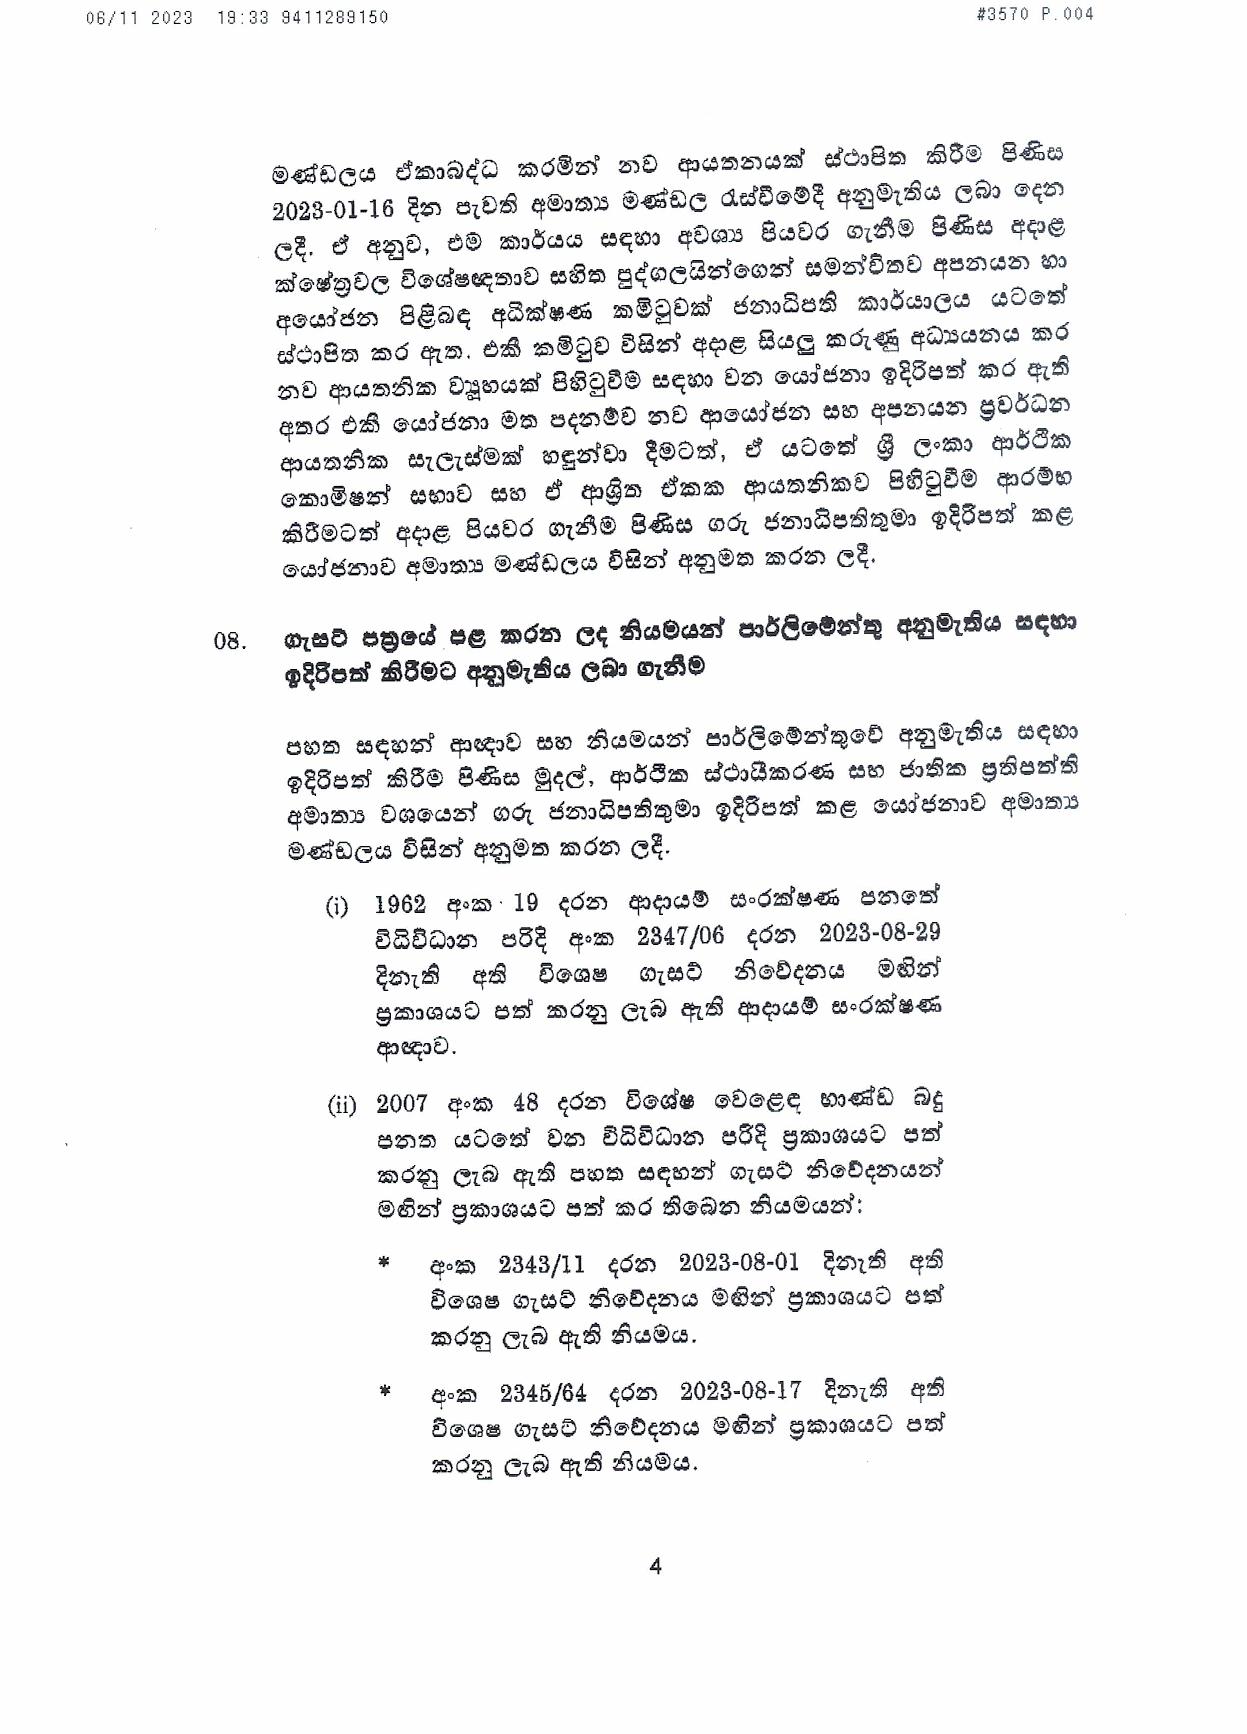 Cabinet Decision on 06.11.2023 1 page 004